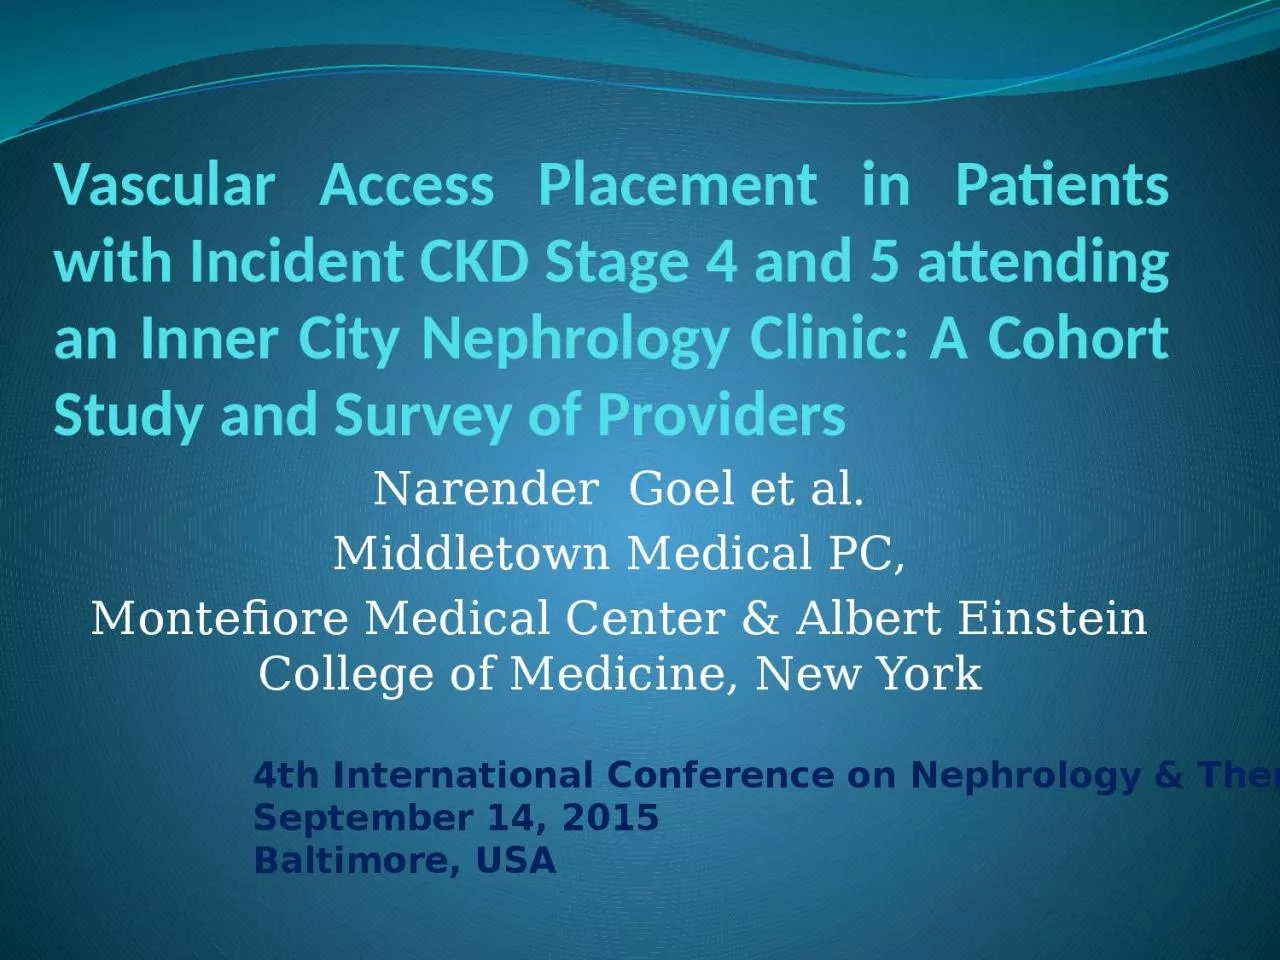 Vascular Access Placement in Patients with Incident CKD Stage 4 and 5 attending an Inner